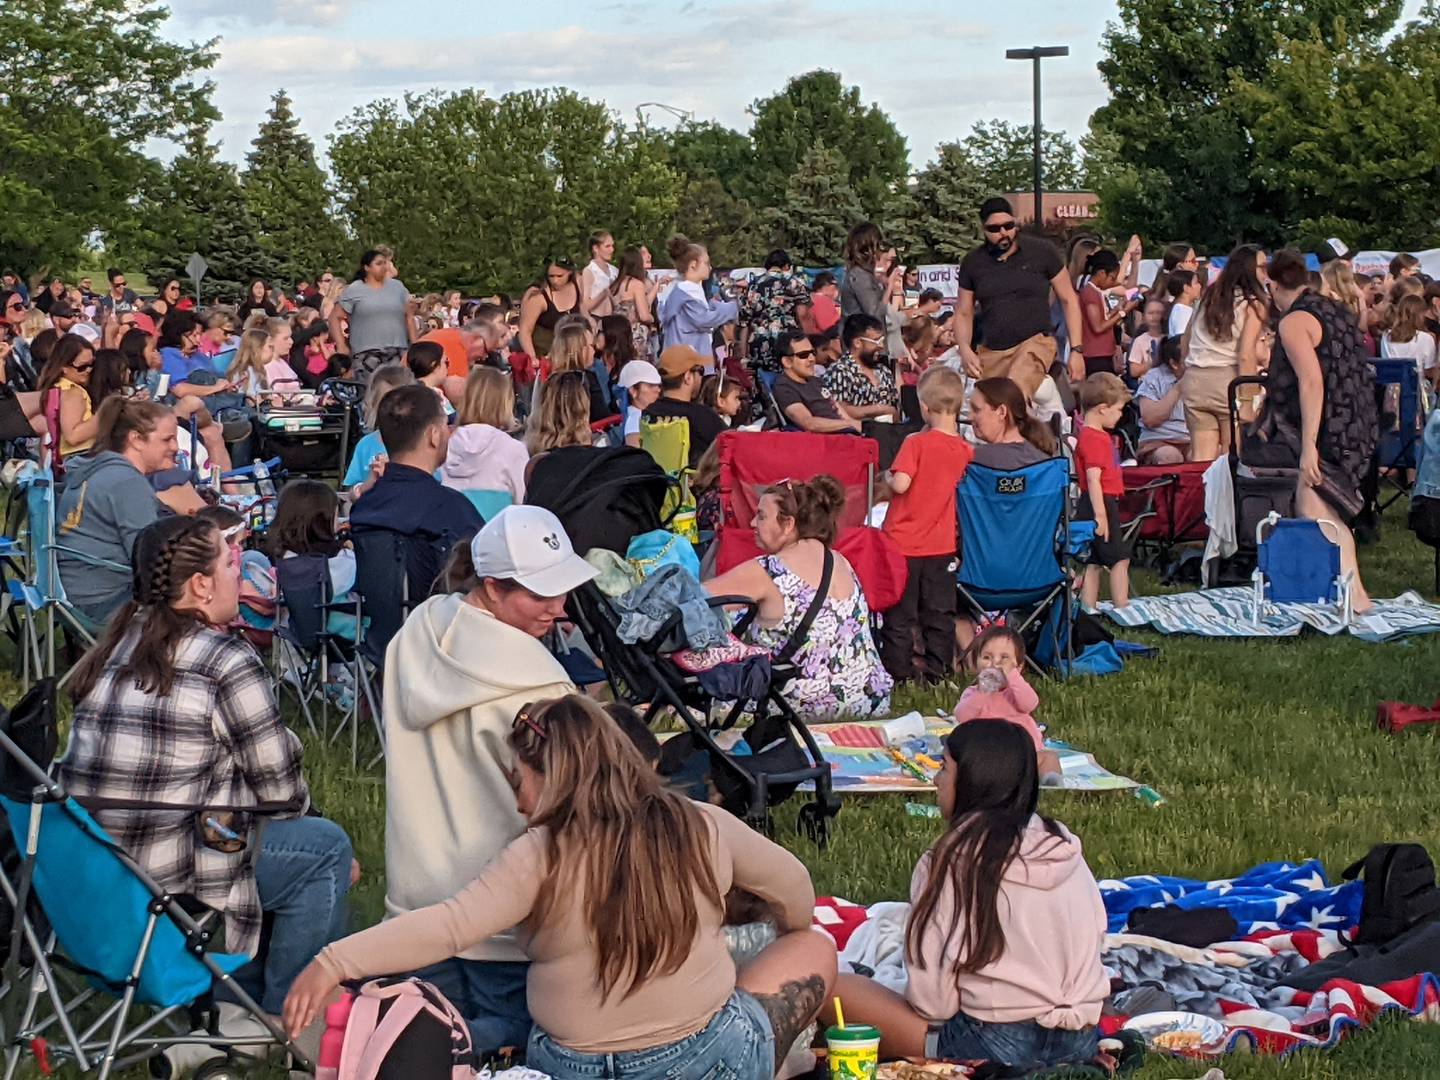 An estimated 3,500 people came to Venue 1012 June 6 to hear Sparks Fly – The Taylor Swift Experience. The band helped kick off the third full season of summer fun at the village of Oswego’s outdoor amphitheater, Venue 1012.